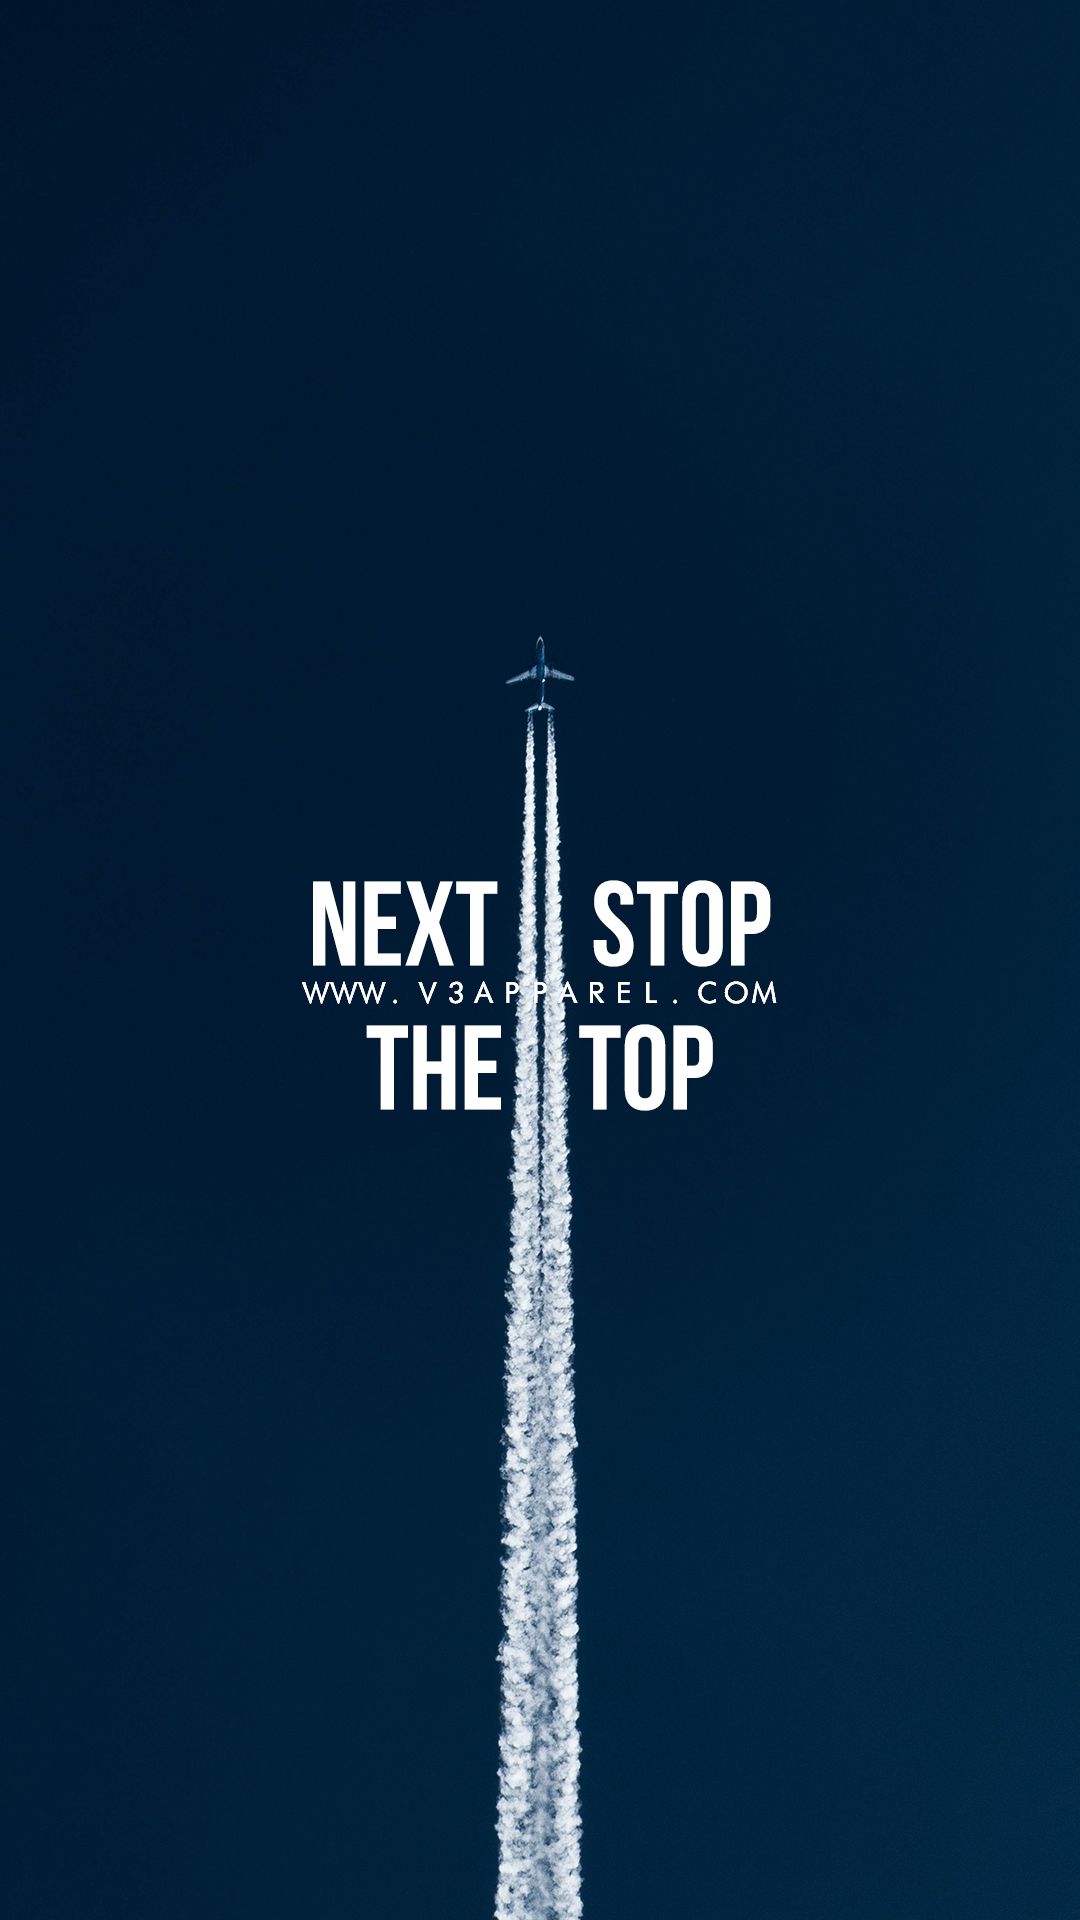 Next stop the top. Download this FREE wallpaper